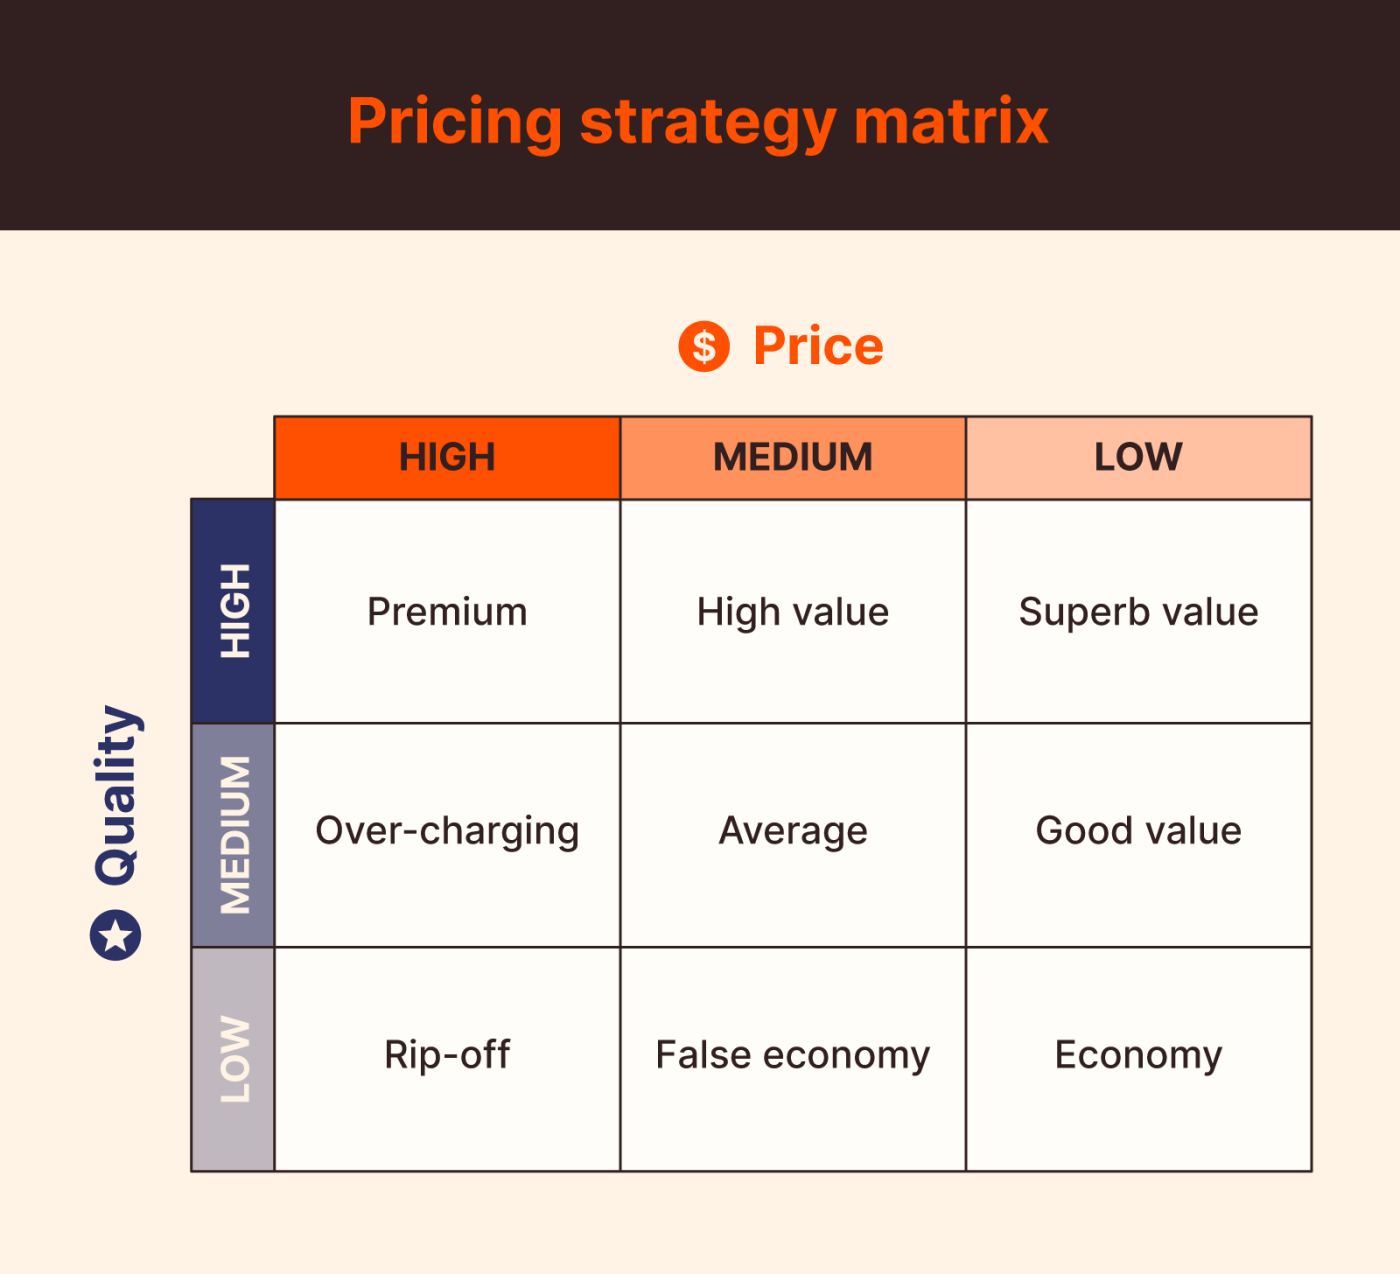 A graphic illustration of the pricing matrix, which shows value positioning for different levels of price and quality